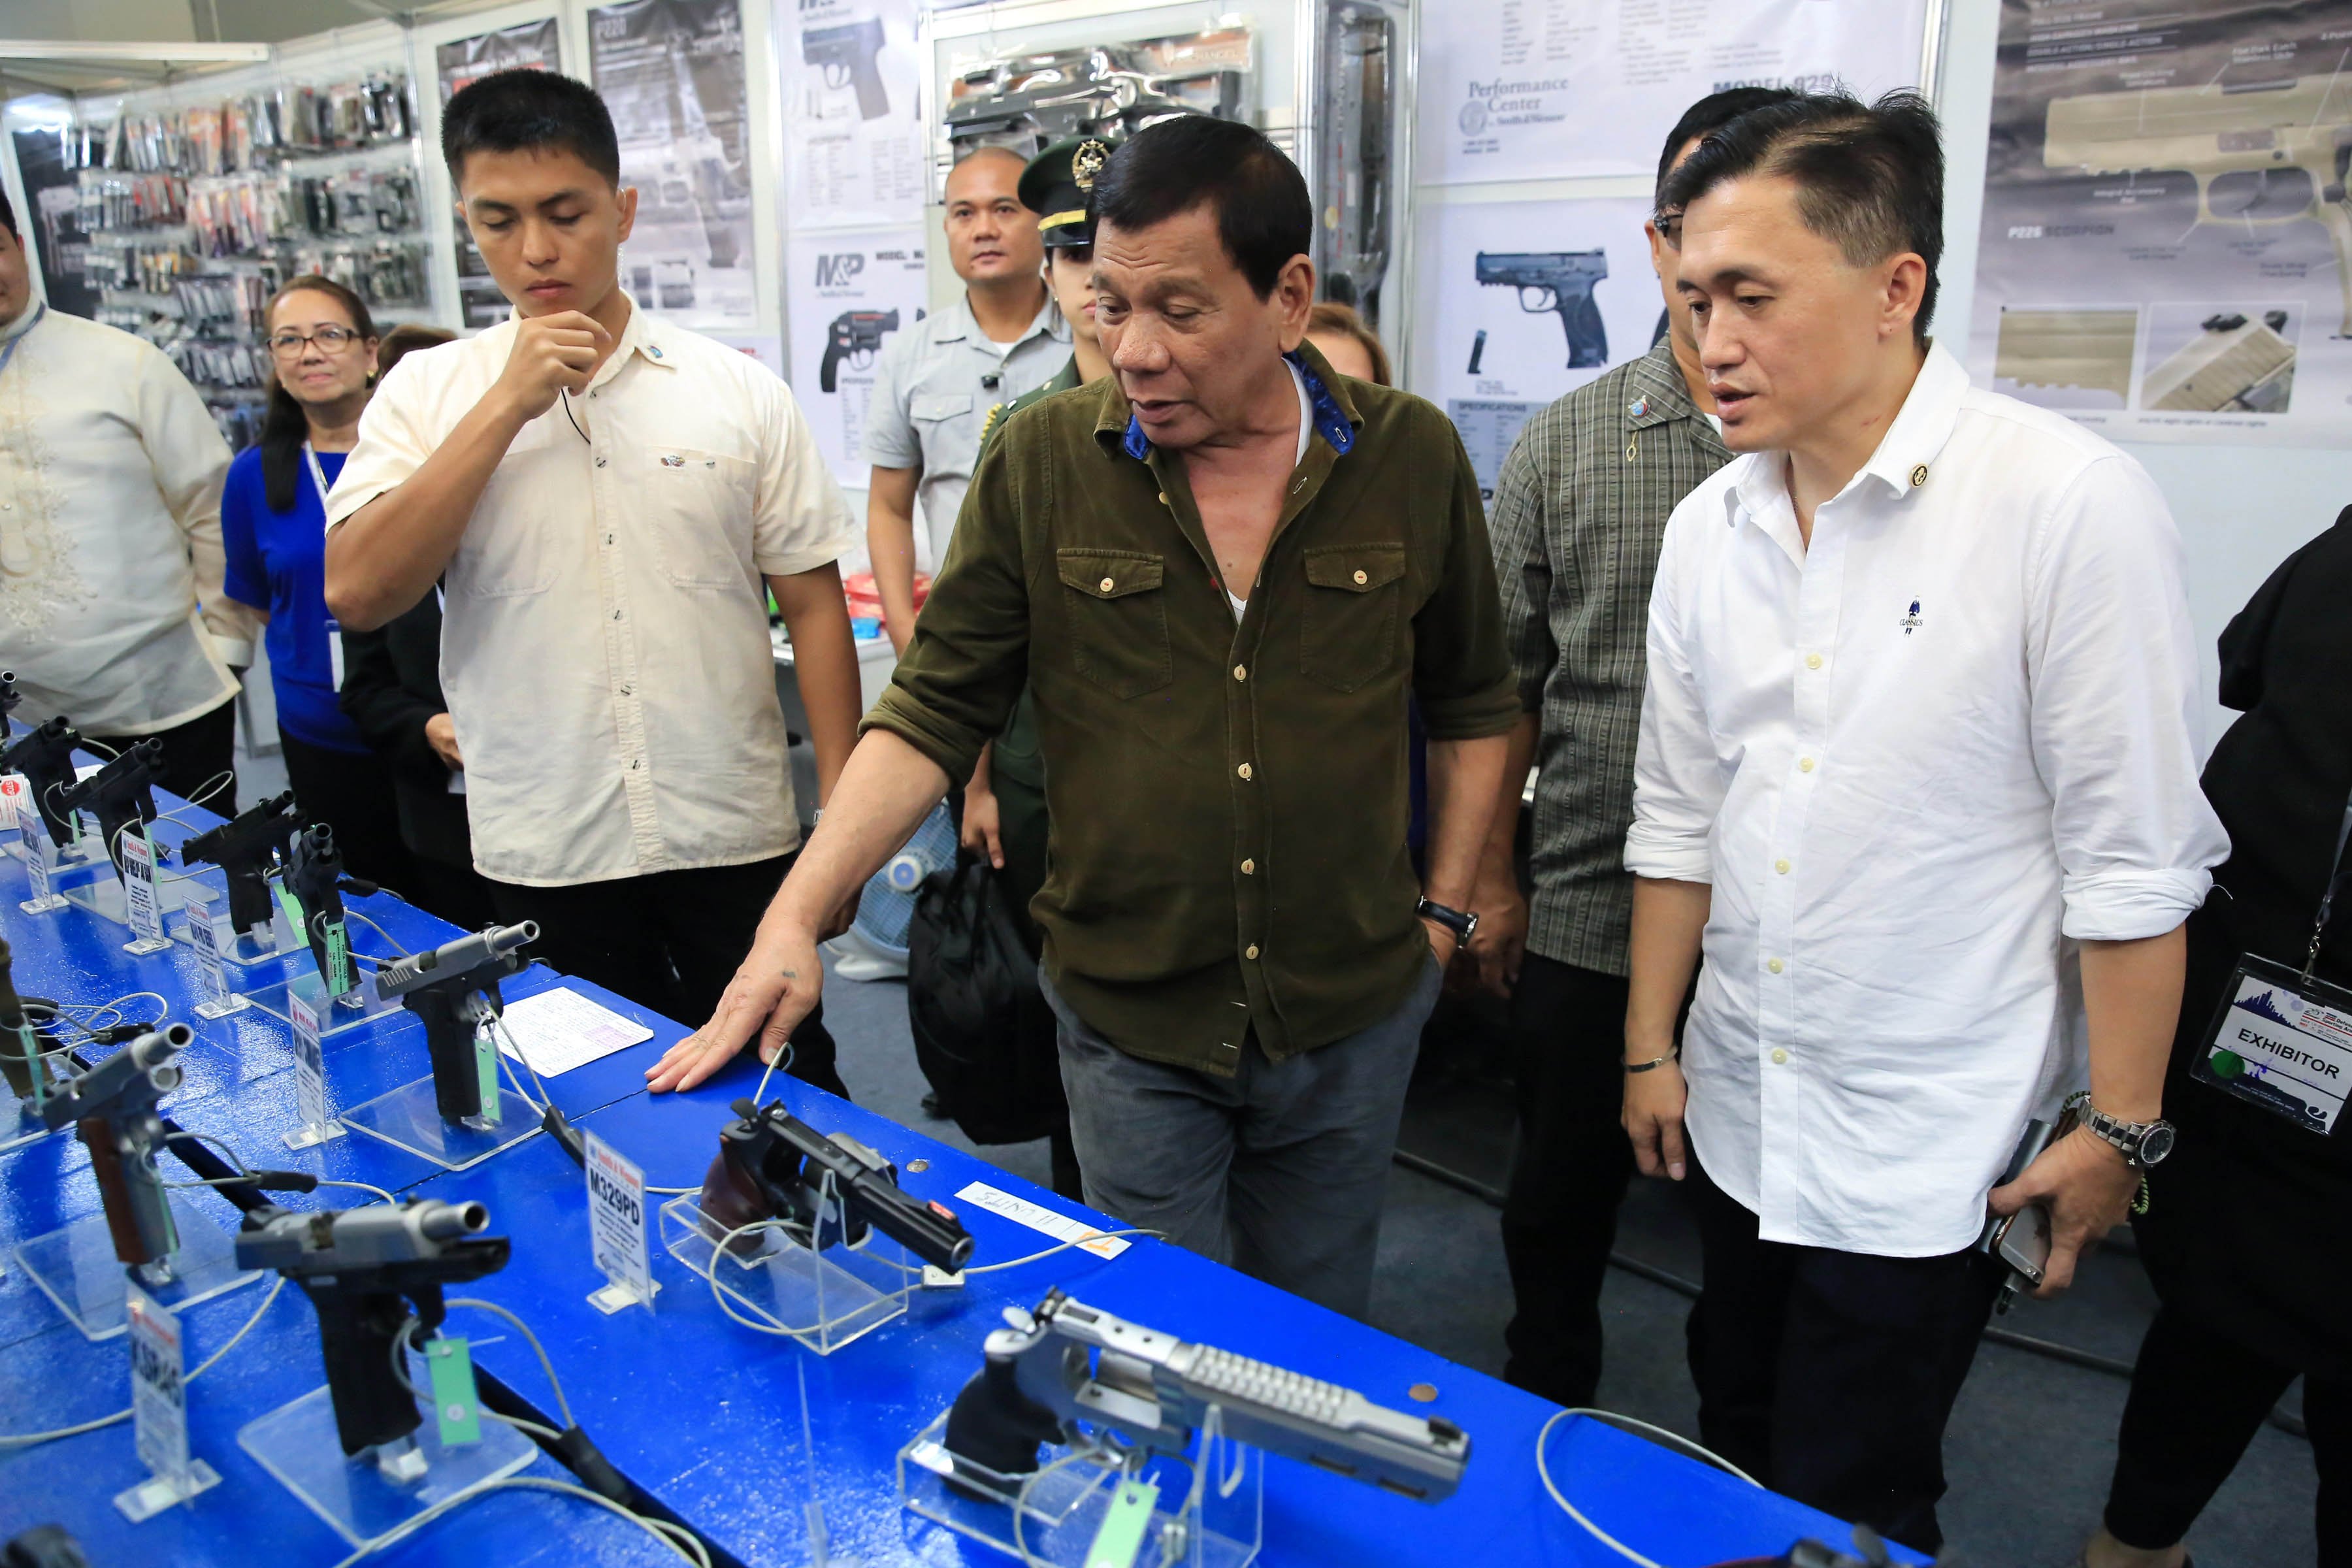 FIREARMS ON DISPLAY. President Duterte visits the AFAD arms show in Davao City